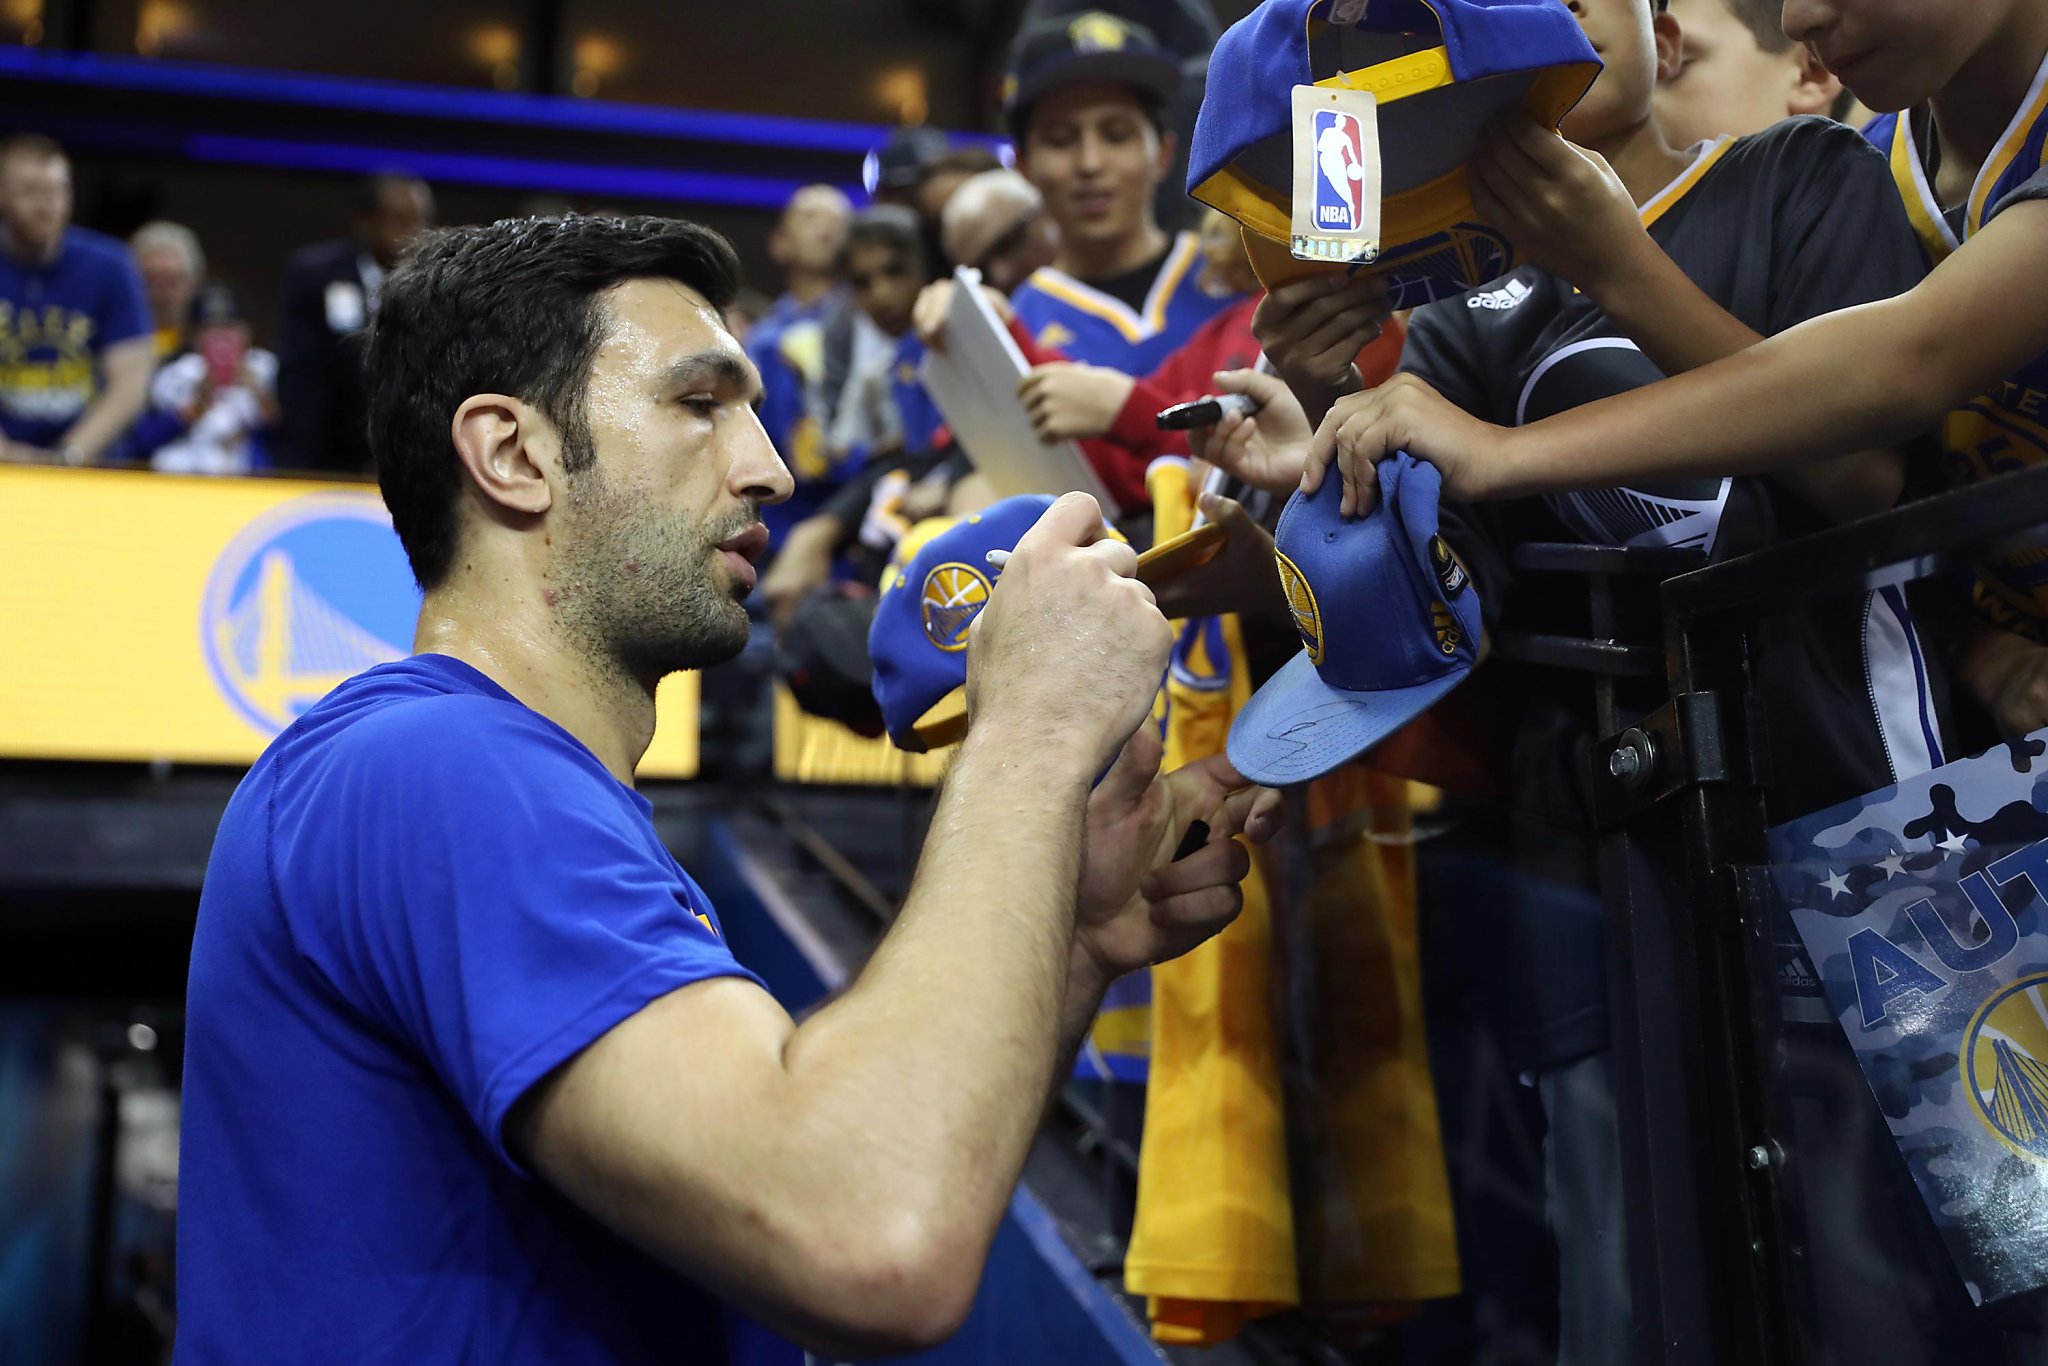 Zaza Pachulia shaves Warriors staffer's beard in time for team photo